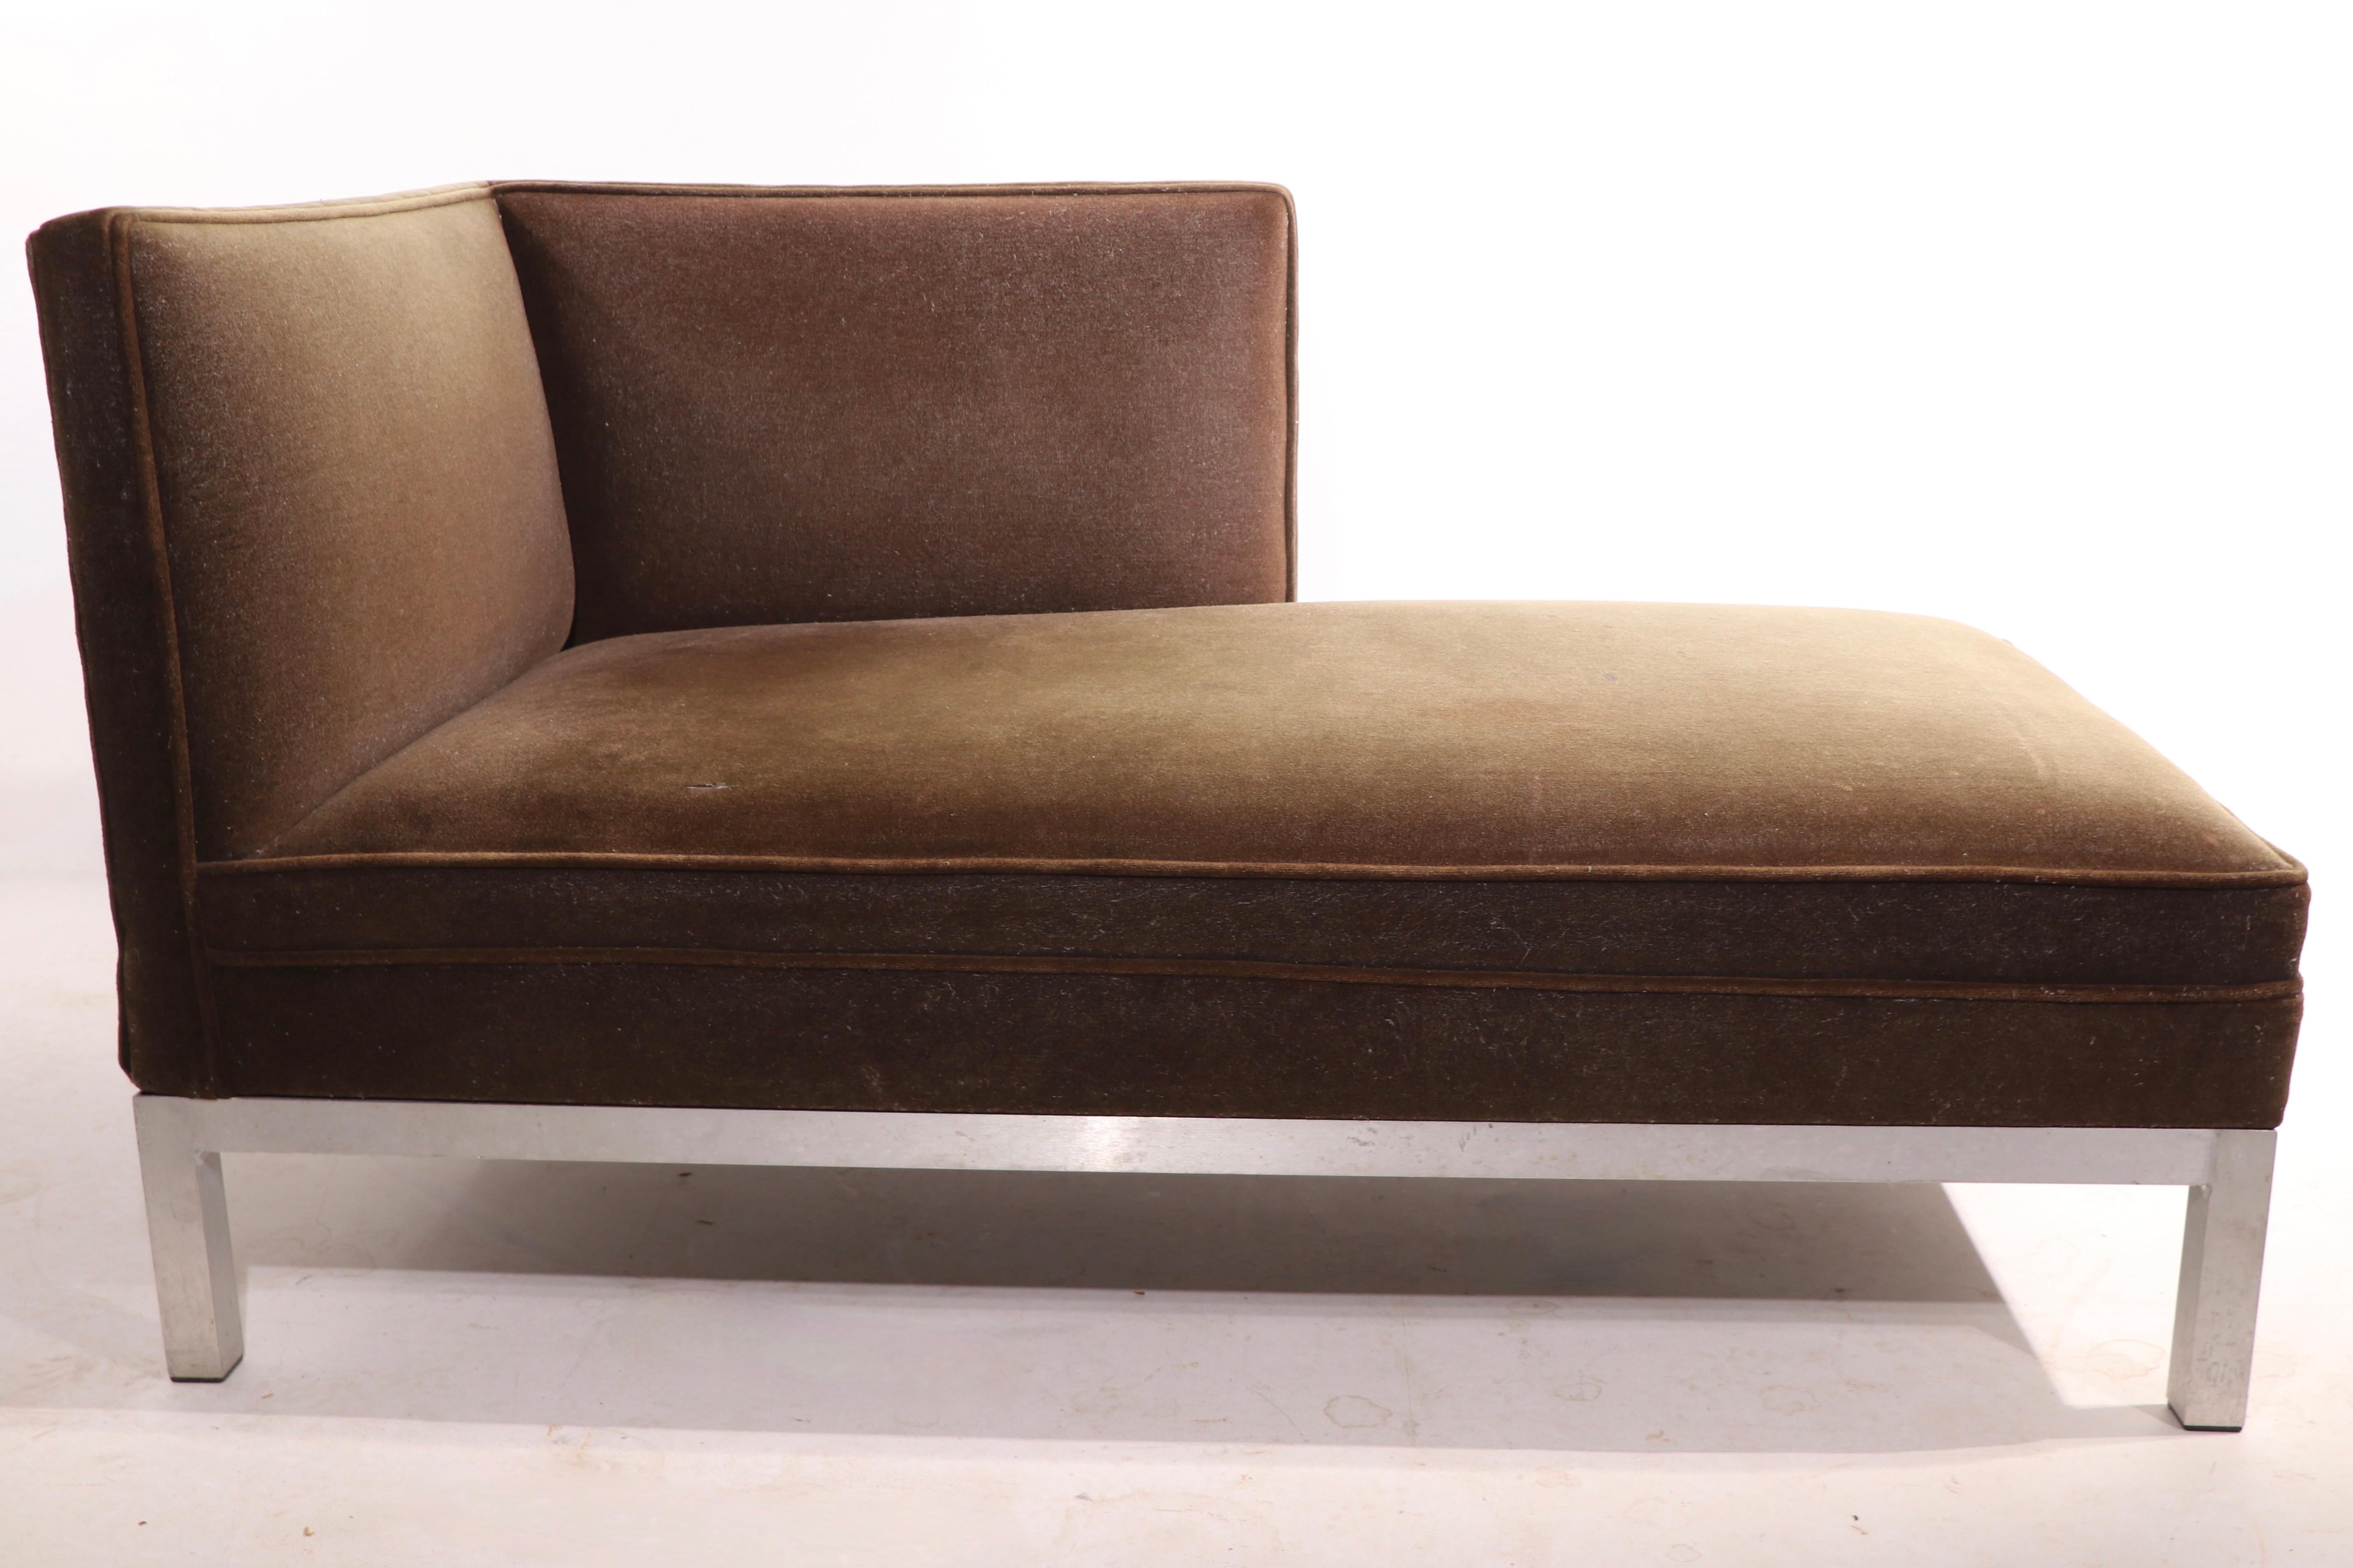 Brown Jordan Charter Furniture Oslo Chaise 1 Available 5